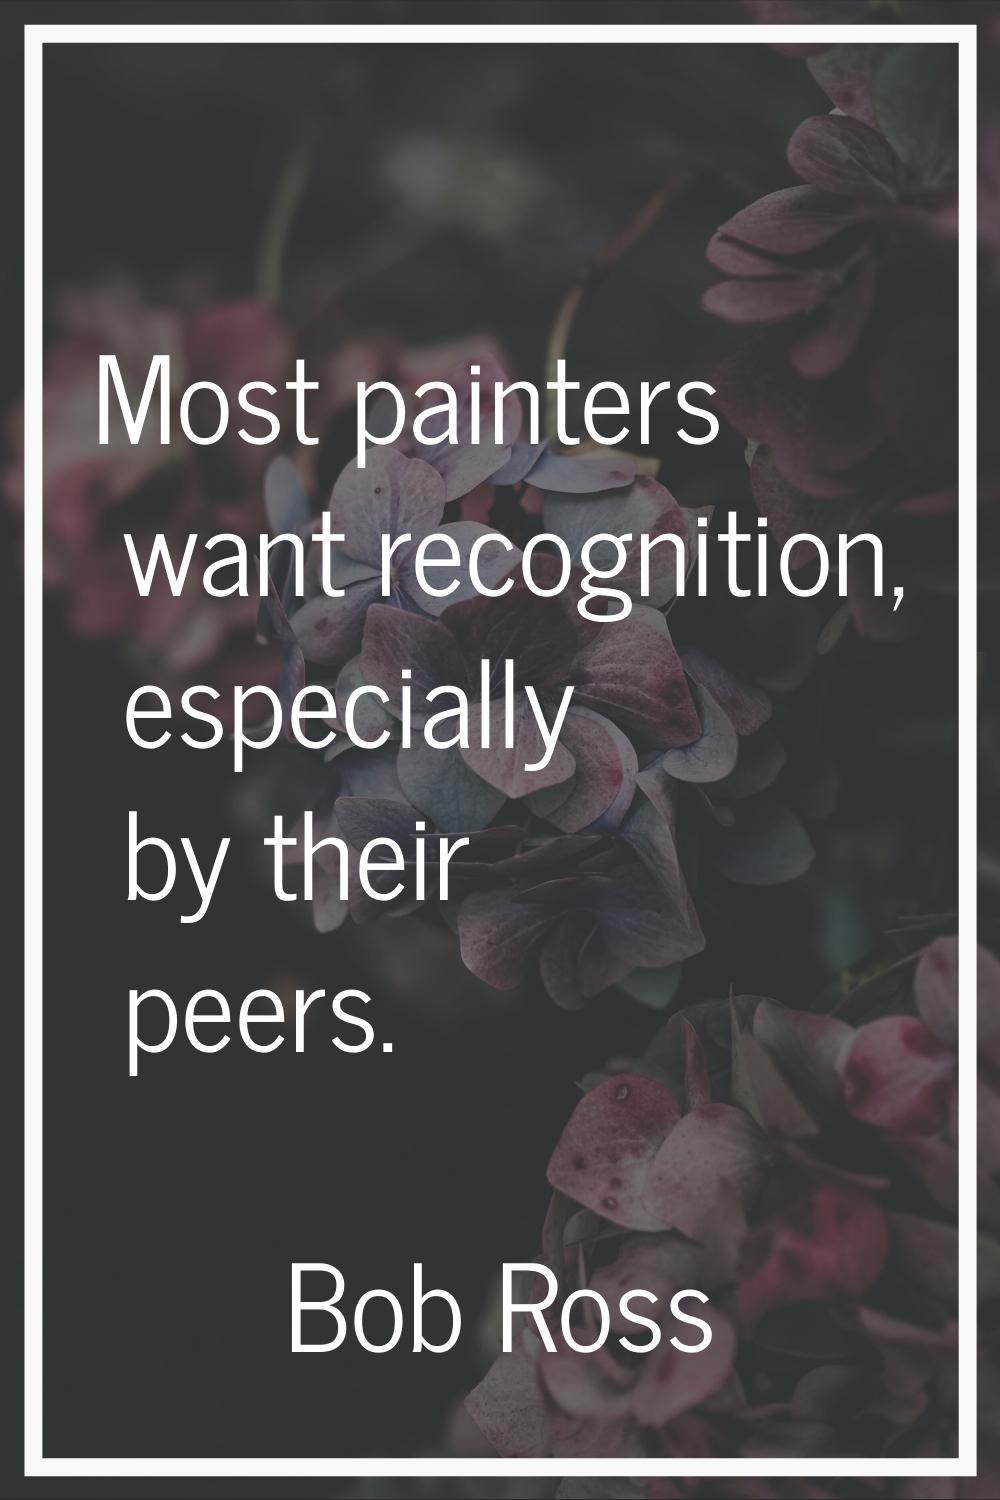 Most painters want recognition, especially by their peers.